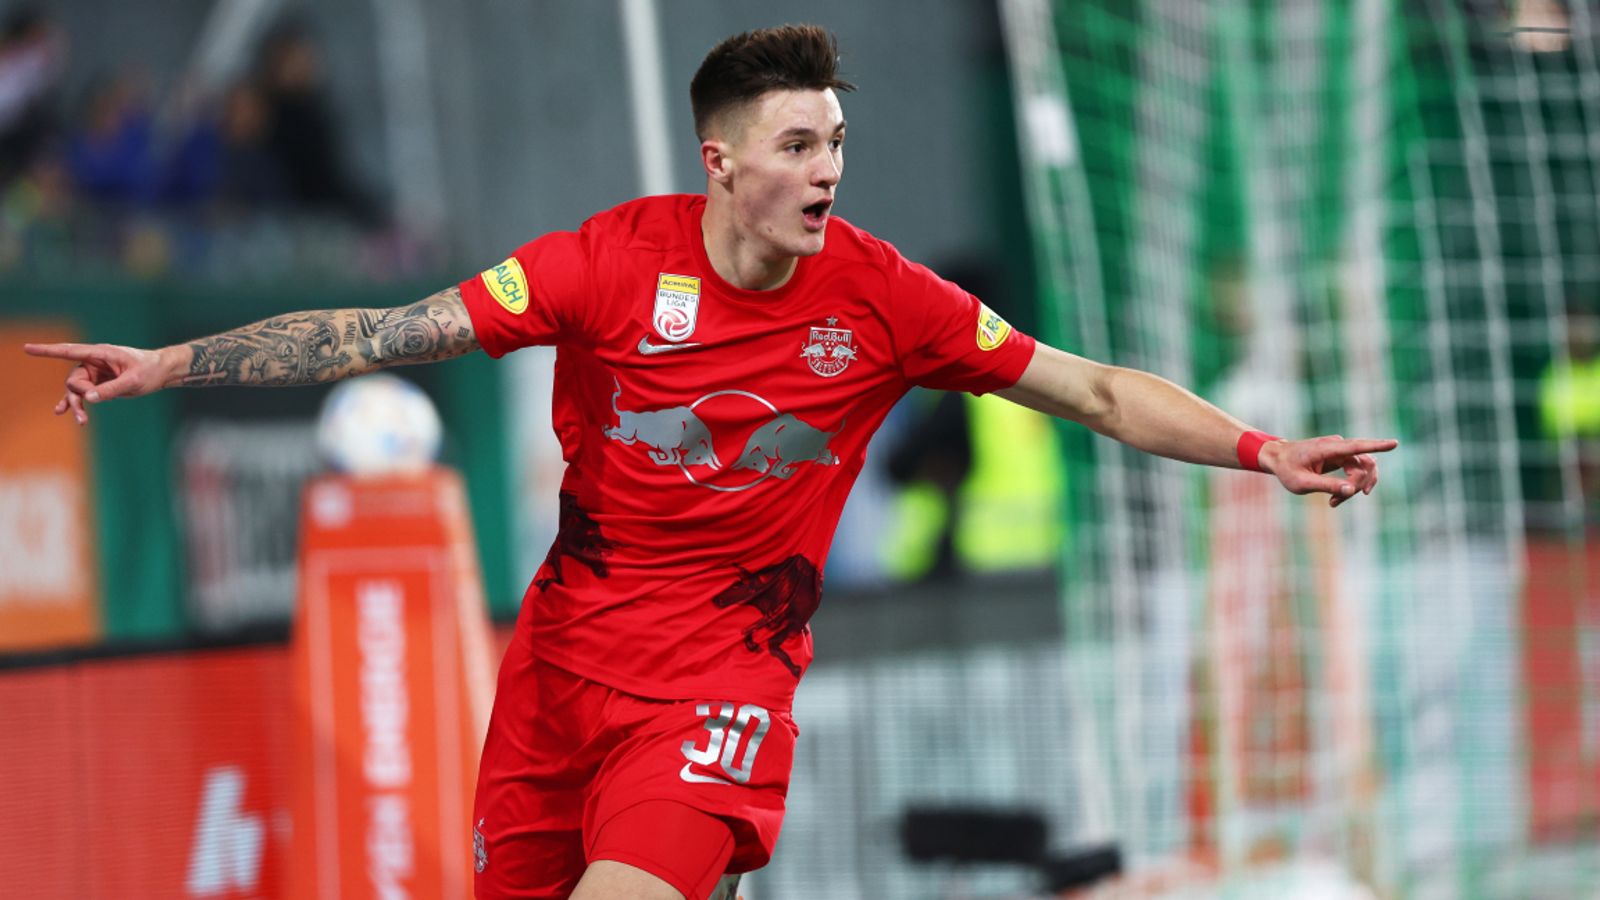  Benjamin Sesko of RB Salzburg celebrates a goal during a match, he has been linked with a transfer to Arsenal in Euro 2024.